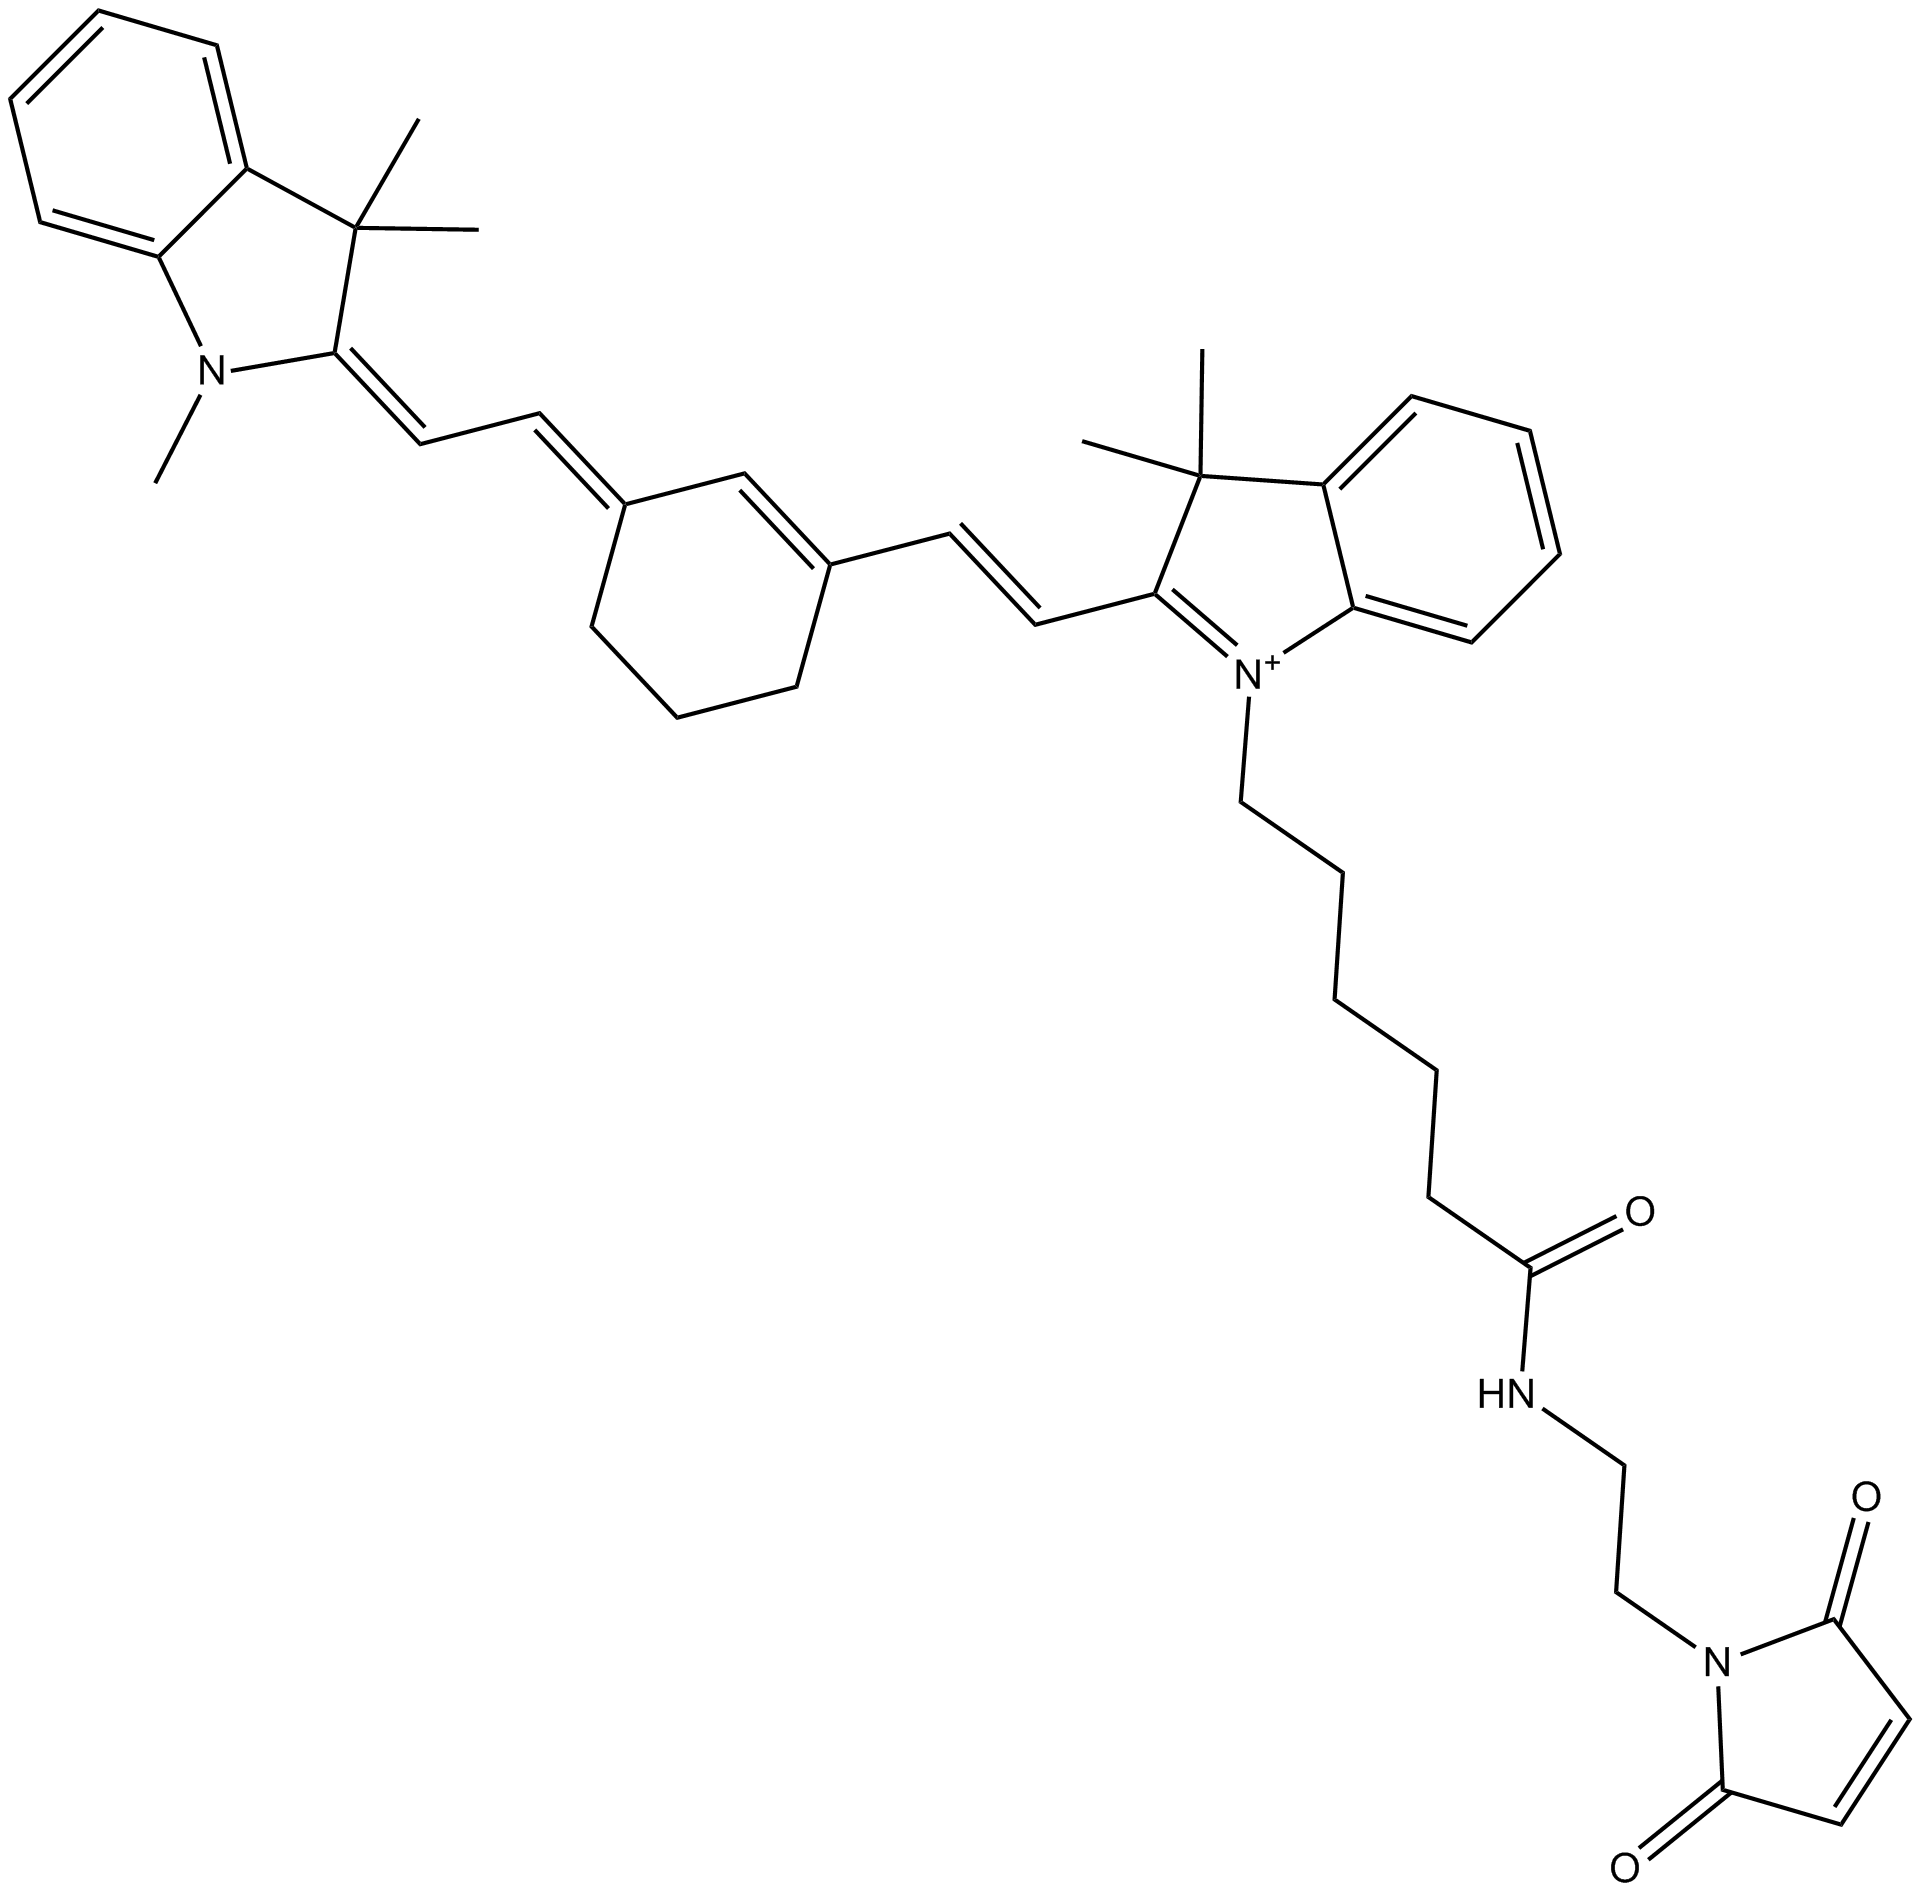 Cy7 maleimide (non-sulfonated)  Chemical Structure